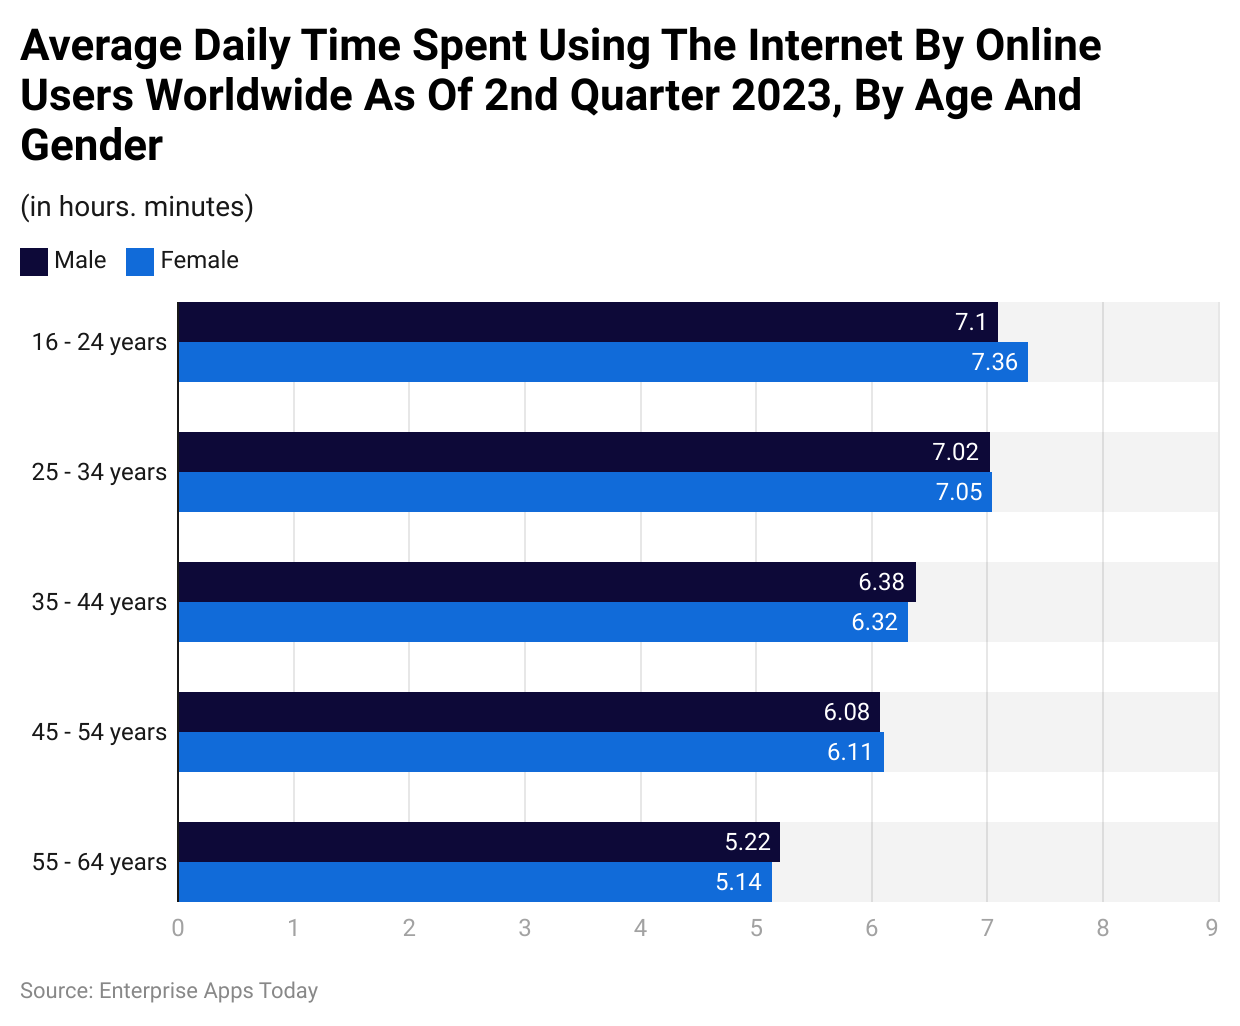 Average daily time spent using the internet by online users worldwide as of 2nd quarter 2023, by age and gender